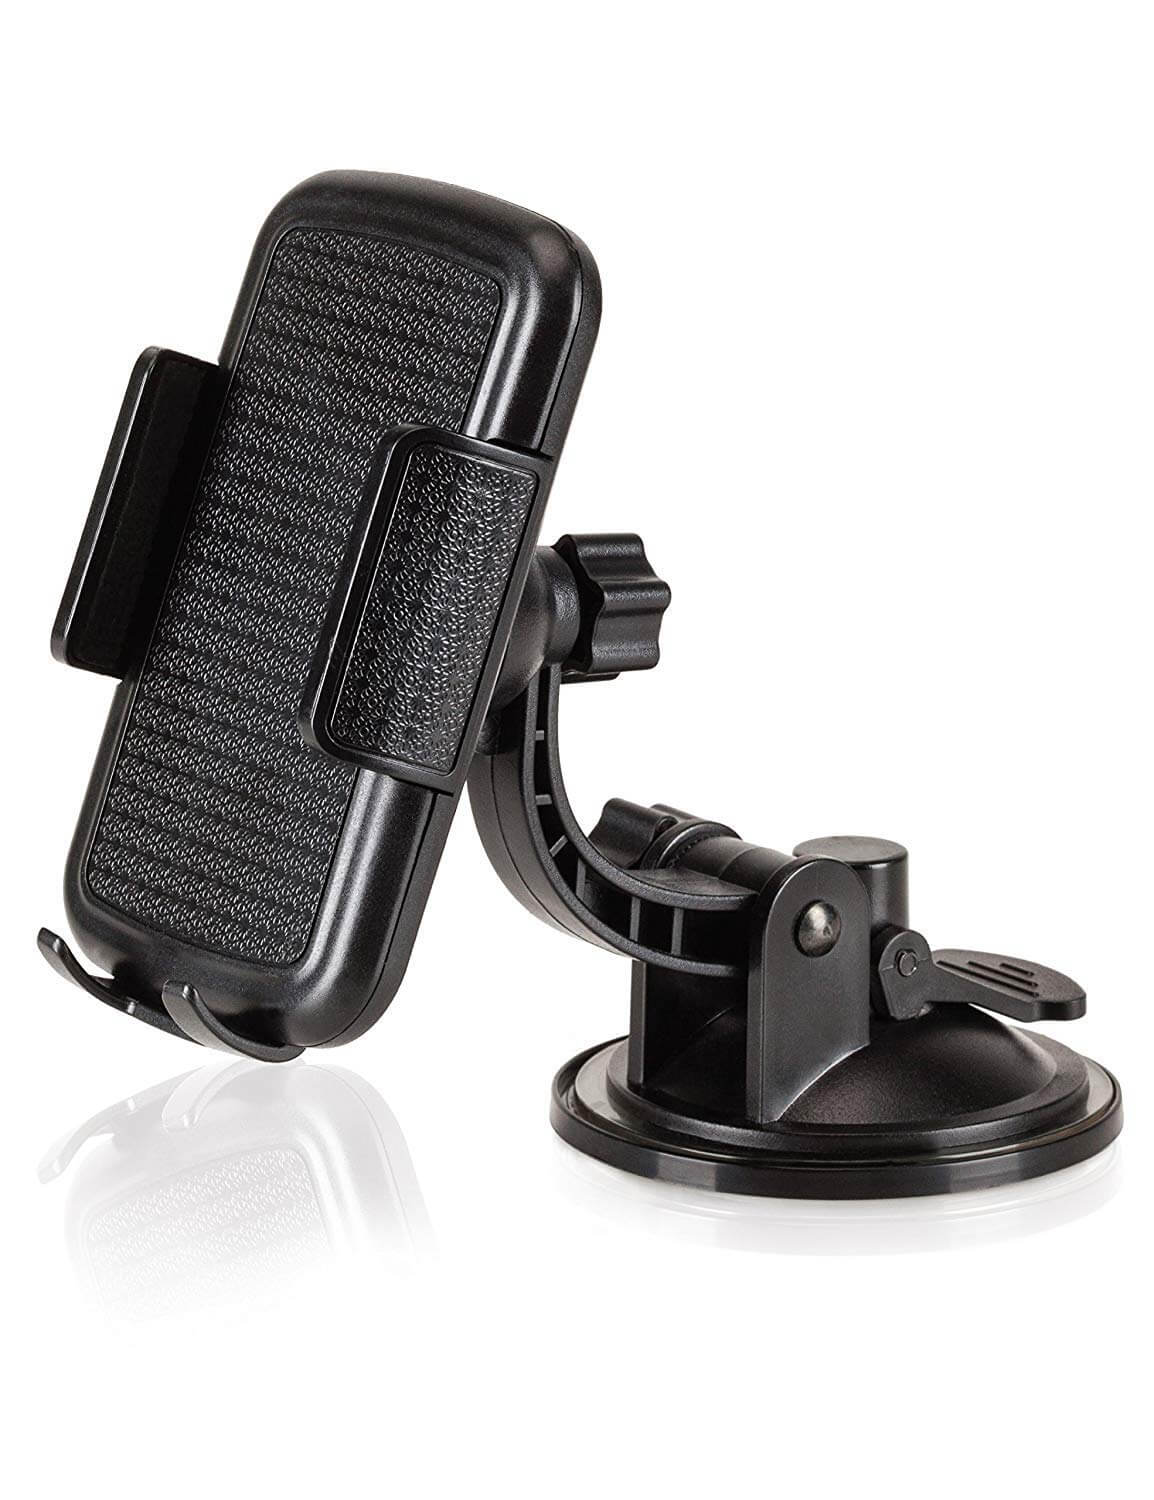 Best car phone holders: windscreen and dash mounts tested - Which?